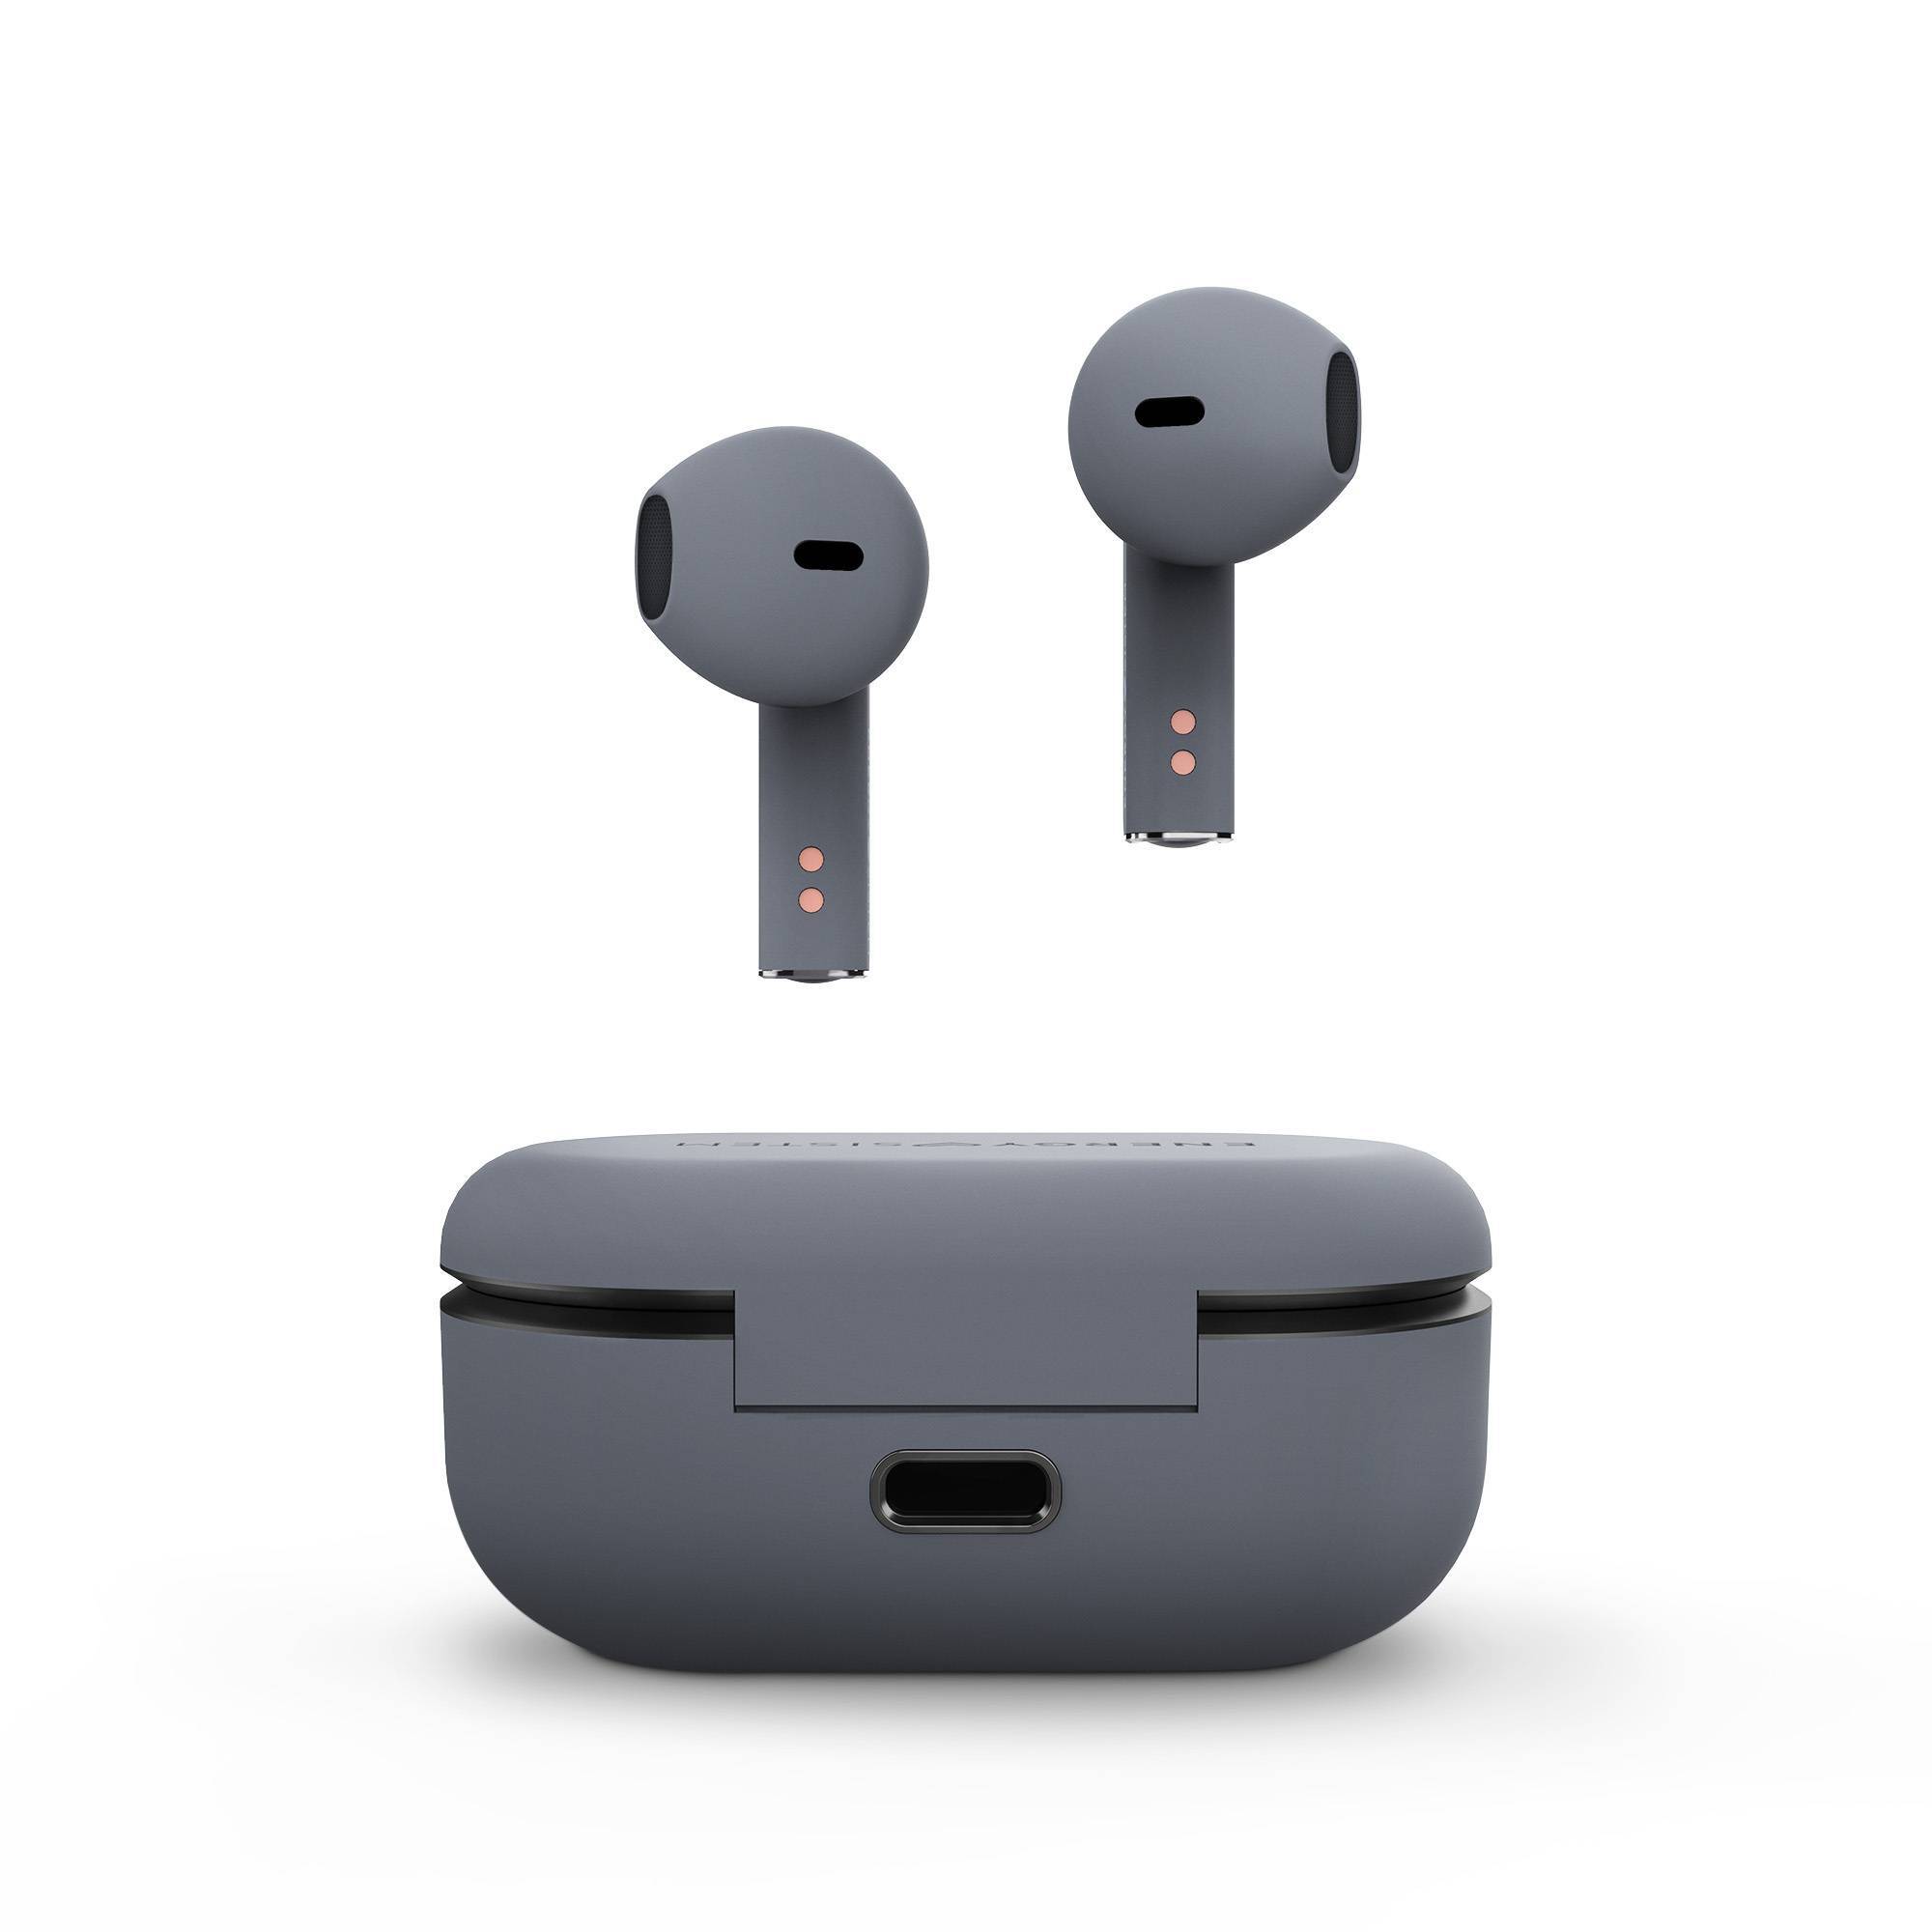 Earphones and charging case for convenient battery charging